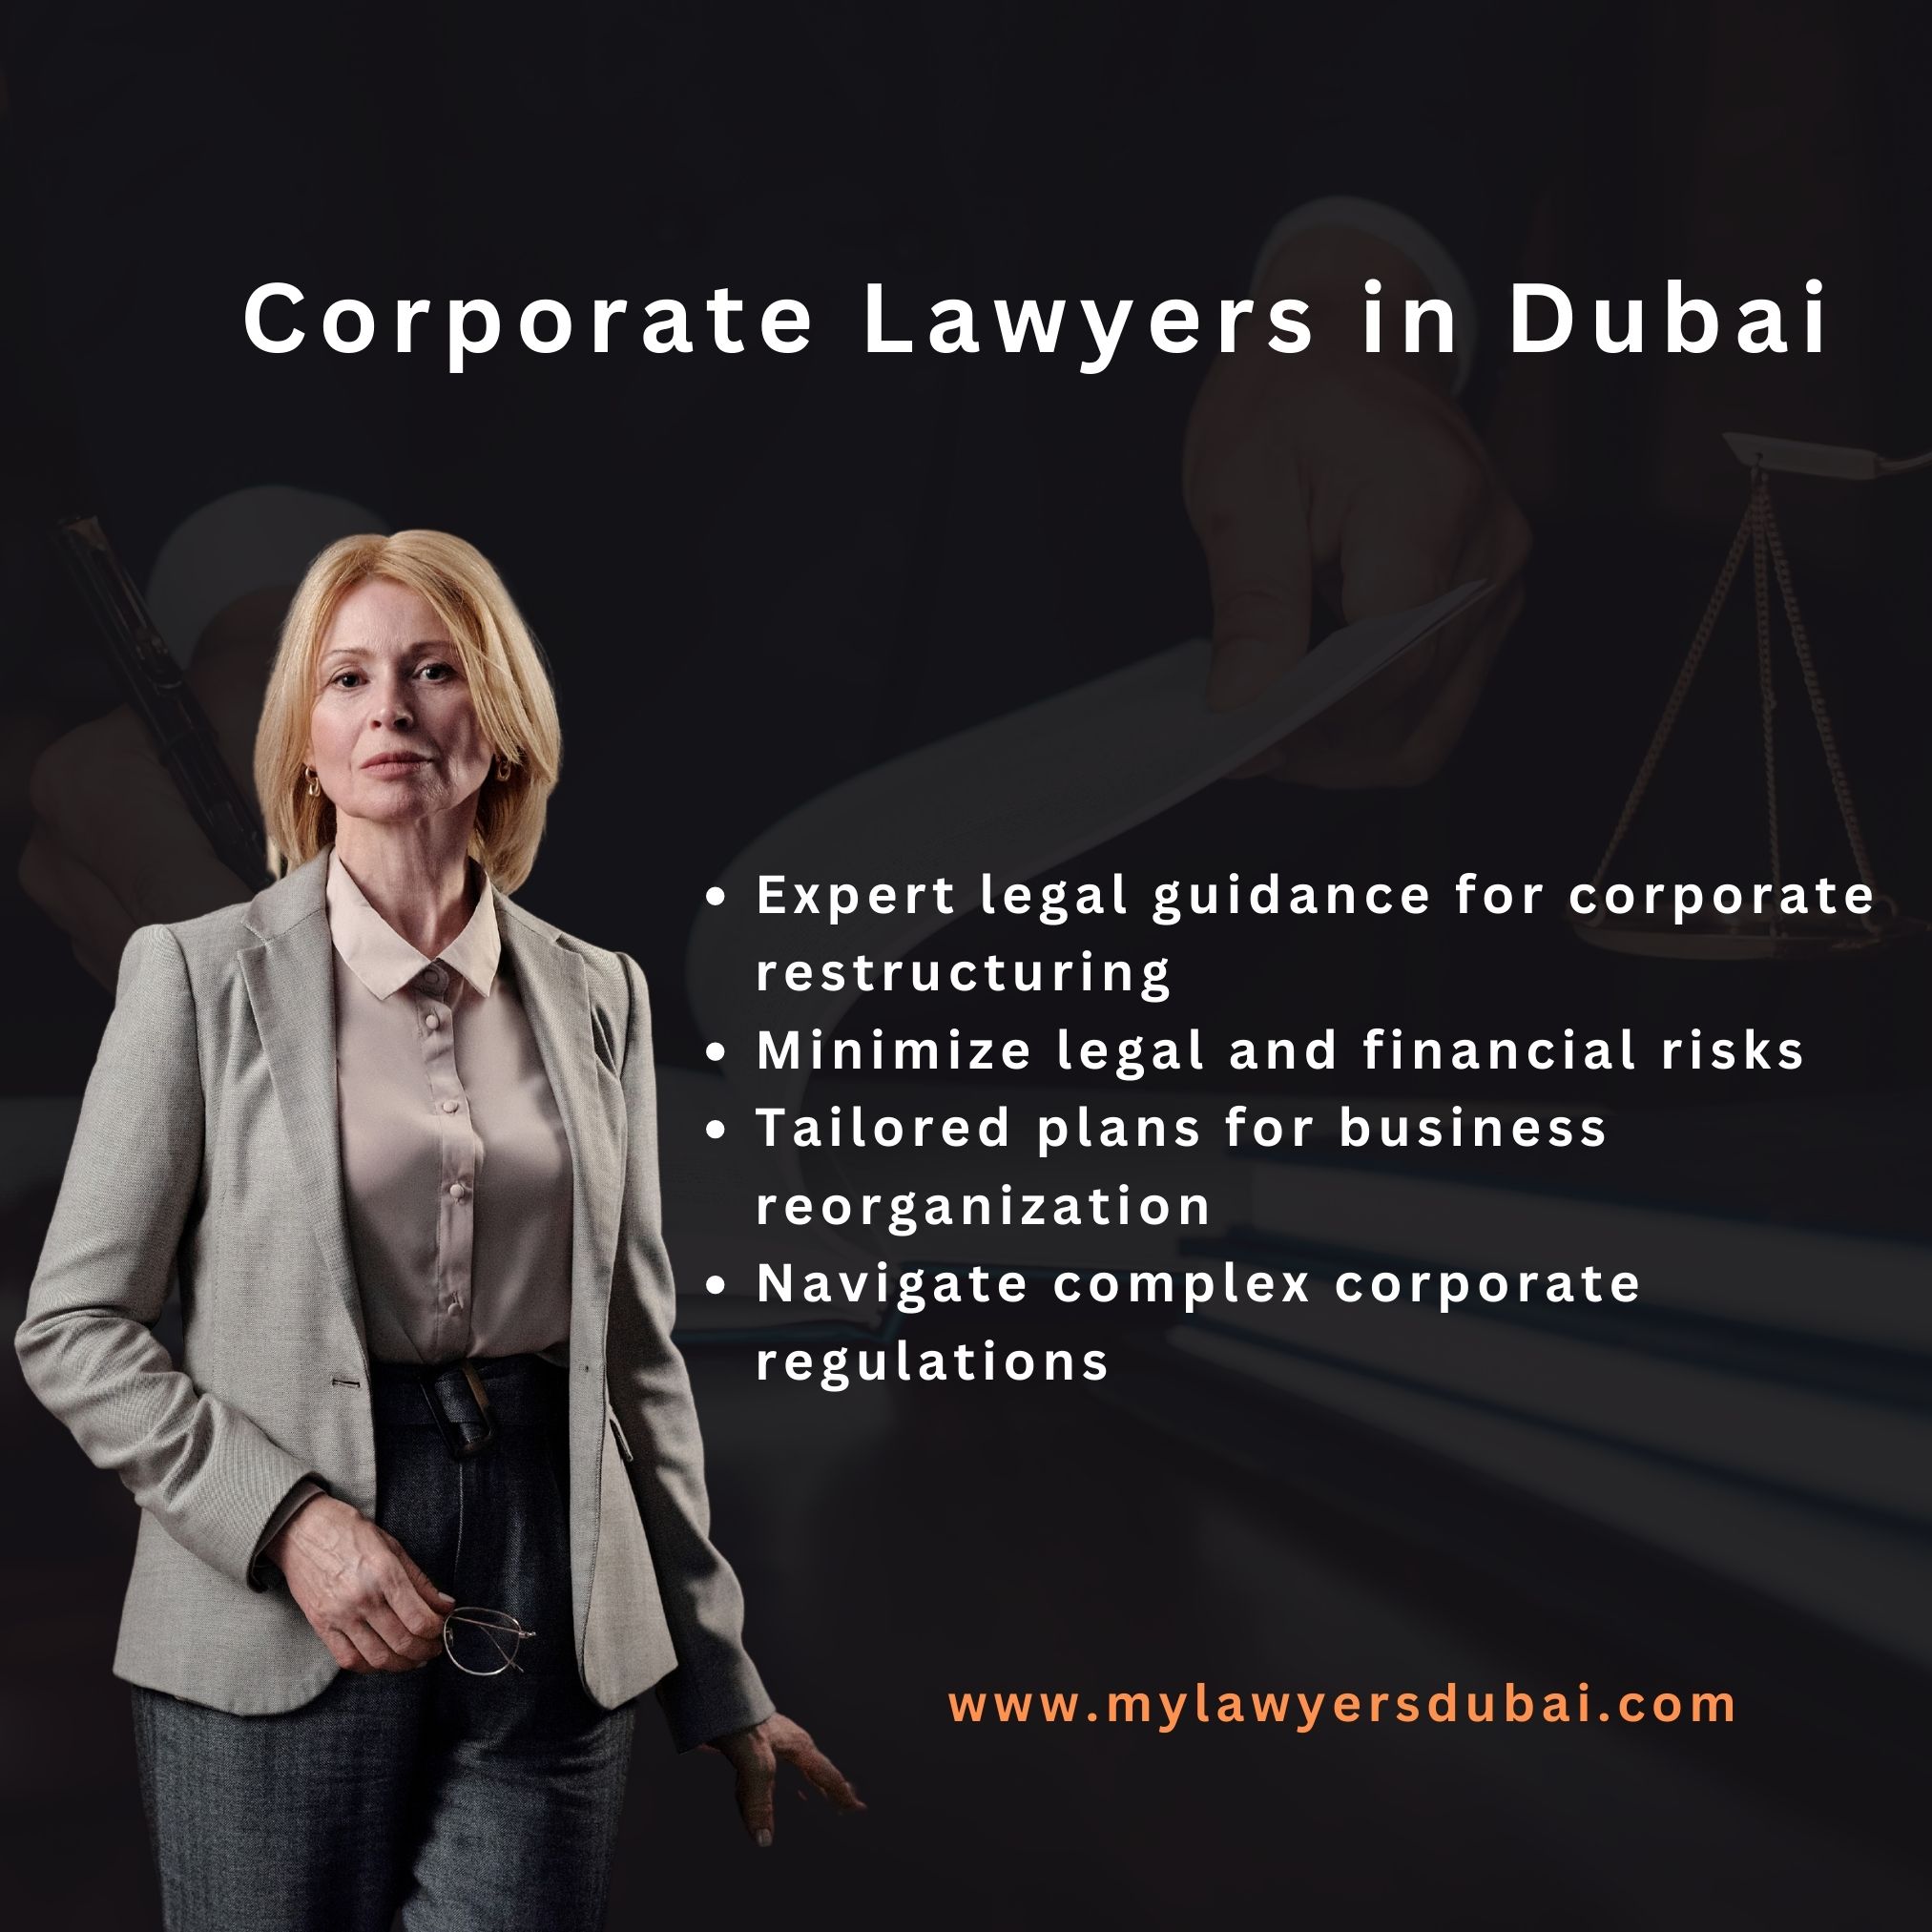 Corporate restructuring lawyers in Dubai